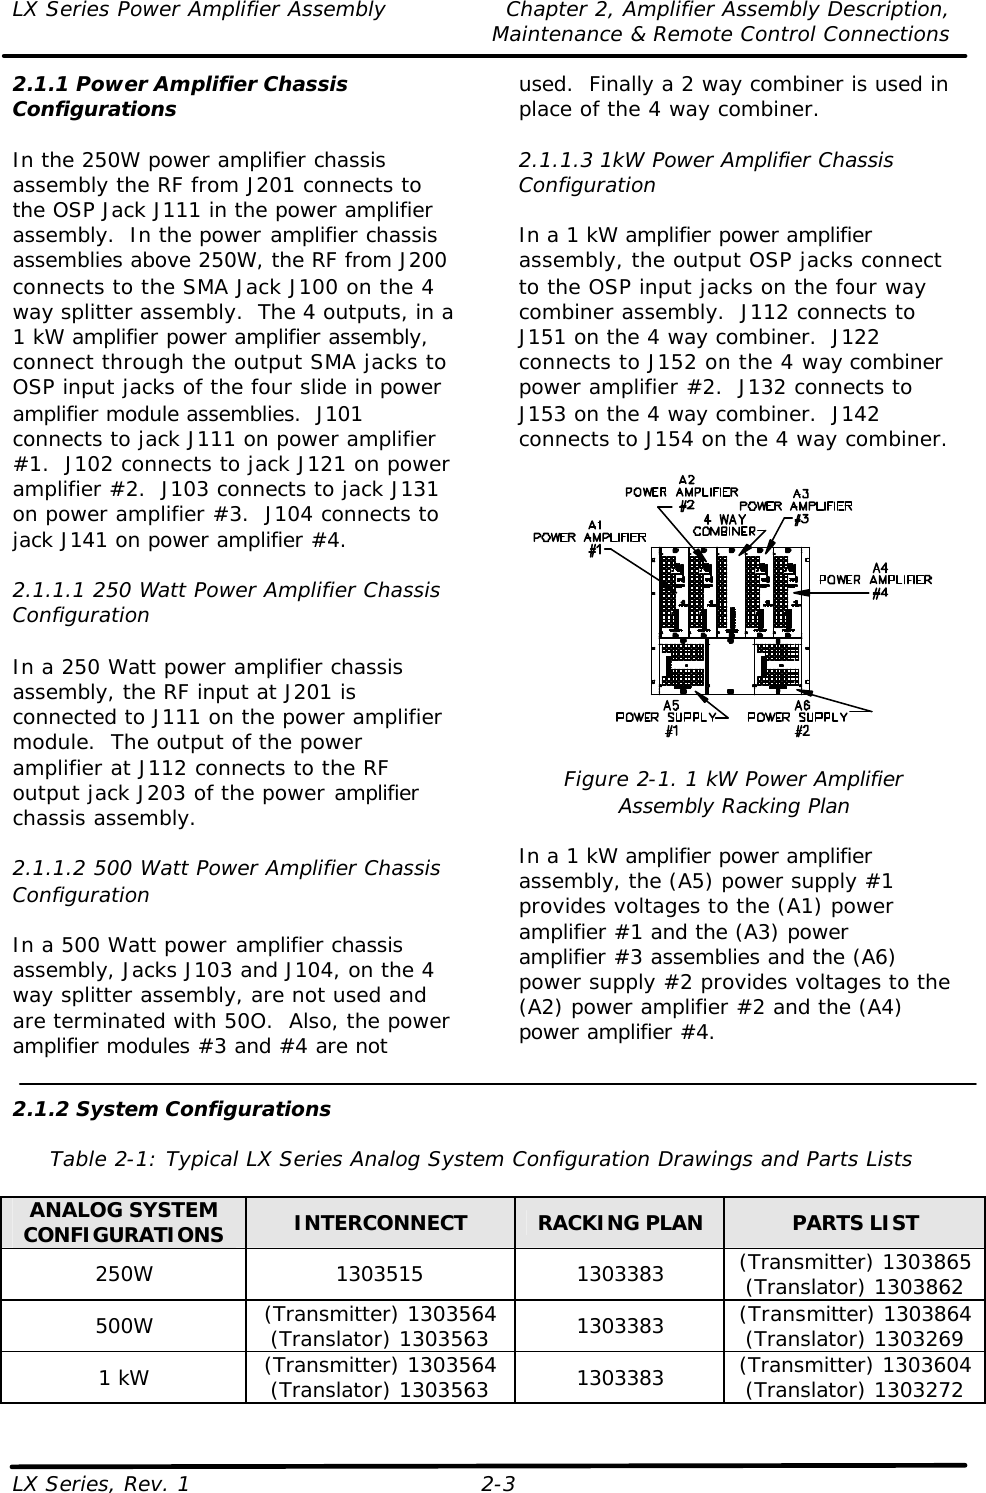 LX Series Power Amplifier Assembly Chapter 2, Amplifier Assembly Description,  Maintenance &amp; Remote Control Connections LX Series, Rev. 1 2-3 2.1.1 Power Amplifier Chassis Configurations  In the 250W power amplifier chassis assembly the RF from J201 connects to the OSP Jack J111 in the power amplifier assembly.  In the power amplifier chassis assemblies above 250W, the RF from J200 connects to the SMA Jack J100 on the 4 way splitter assembly.  The 4 outputs, in a 1 kW amplifier power amplifier assembly, connect through the output SMA jacks to OSP input jacks of the four slide in power amplifier module assemblies.  J101 connects to jack J111 on power amplifier #1.  J102 connects to jack J121 on power amplifier #2.  J103 connects to jack J131 on power amplifier #3.  J104 connects to jack J141 on power amplifier #4.  2.1.1.1 250 Watt Power Amplifier Chassis Configuration  In a 250 Watt power amplifier chassis assembly, the RF input at J201 is connected to J111 on the power amplifier module.  The output of the power amplifier at J112 connects to the RF output jack J203 of the power amplifier chassis assembly.  2.1.1.2 500 Watt Power Amplifier Chassis Configuration  In a 500 Watt power amplifier chassis assembly, Jacks J103 and J104, on the 4 way splitter assembly, are not used and are terminated with 50O.  Also, the power amplifier modules #3 and #4 are not used.  Finally a 2 way combiner is used in place of the 4 way combiner.  2.1.1.3 1kW Power Amplifier Chassis Configuration  In a 1 kW amplifier power amplifier assembly, the output OSP jacks connect to the OSP input jacks on the four way combiner assembly.  J112 connects to J151 on the 4 way combiner.  J122 connects to J152 on the 4 way combiner power amplifier #2.  J132 connects to J153 on the 4 way combiner.  J142 connects to J154 on the 4 way combiner.    Figure 2-1. 1 kW Power Amplifier Assembly Racking Plan  In a 1 kW amplifier power amplifier assembly, the (A5) power supply #1 provides voltages to the (A1) power amplifier #1 and the (A3) power amplifier #3 assemblies and the (A6) power supply #2 provides voltages to the (A2) power amplifier #2 and the (A4) power amplifier #4.   2.1.2 System Configurations  Table 2-1: Typical LX Series Analog System Configuration Drawings and Parts Lists  ANALOG SYSTEM CONFIGURATIONS INTERCONNECT RACKING PLAN PARTS LIST 250W 1303515 1303383 (Transmitter) 1303865 (Translator) 1303862 500W (Transmitter) 1303564 (Translator) 1303563 1303383 (Transmitter) 1303864 (Translator) 1303269 1 kW (Transmitter) 1303564 (Translator) 1303563 1303383 (Transmitter) 1303604 (Translator) 1303272 